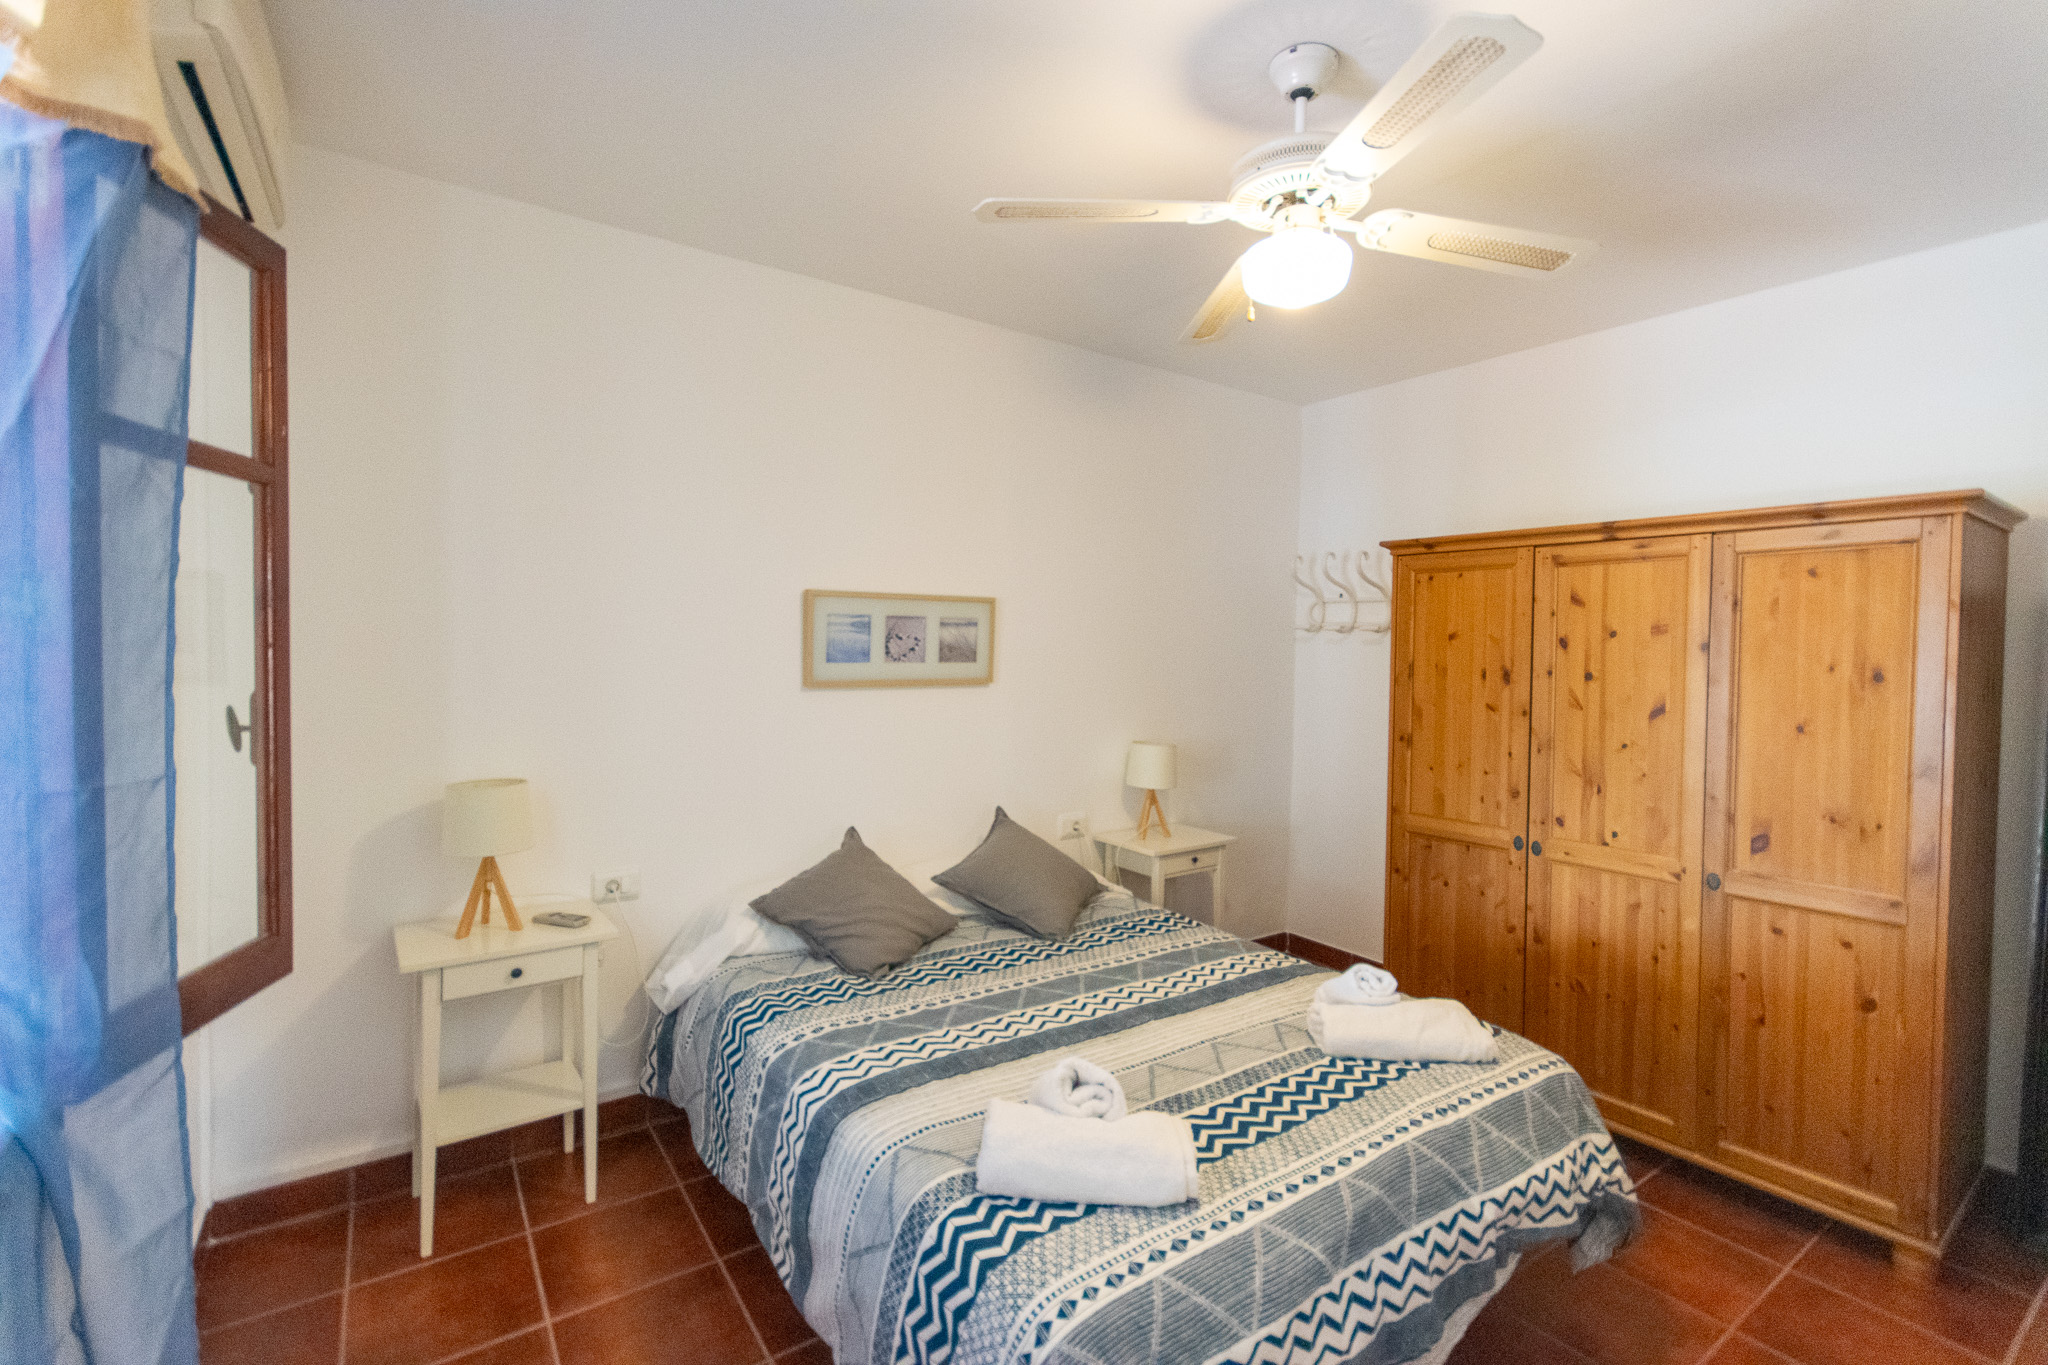 Bedroom of a villa with tourist license for sale in Cala n Bosch